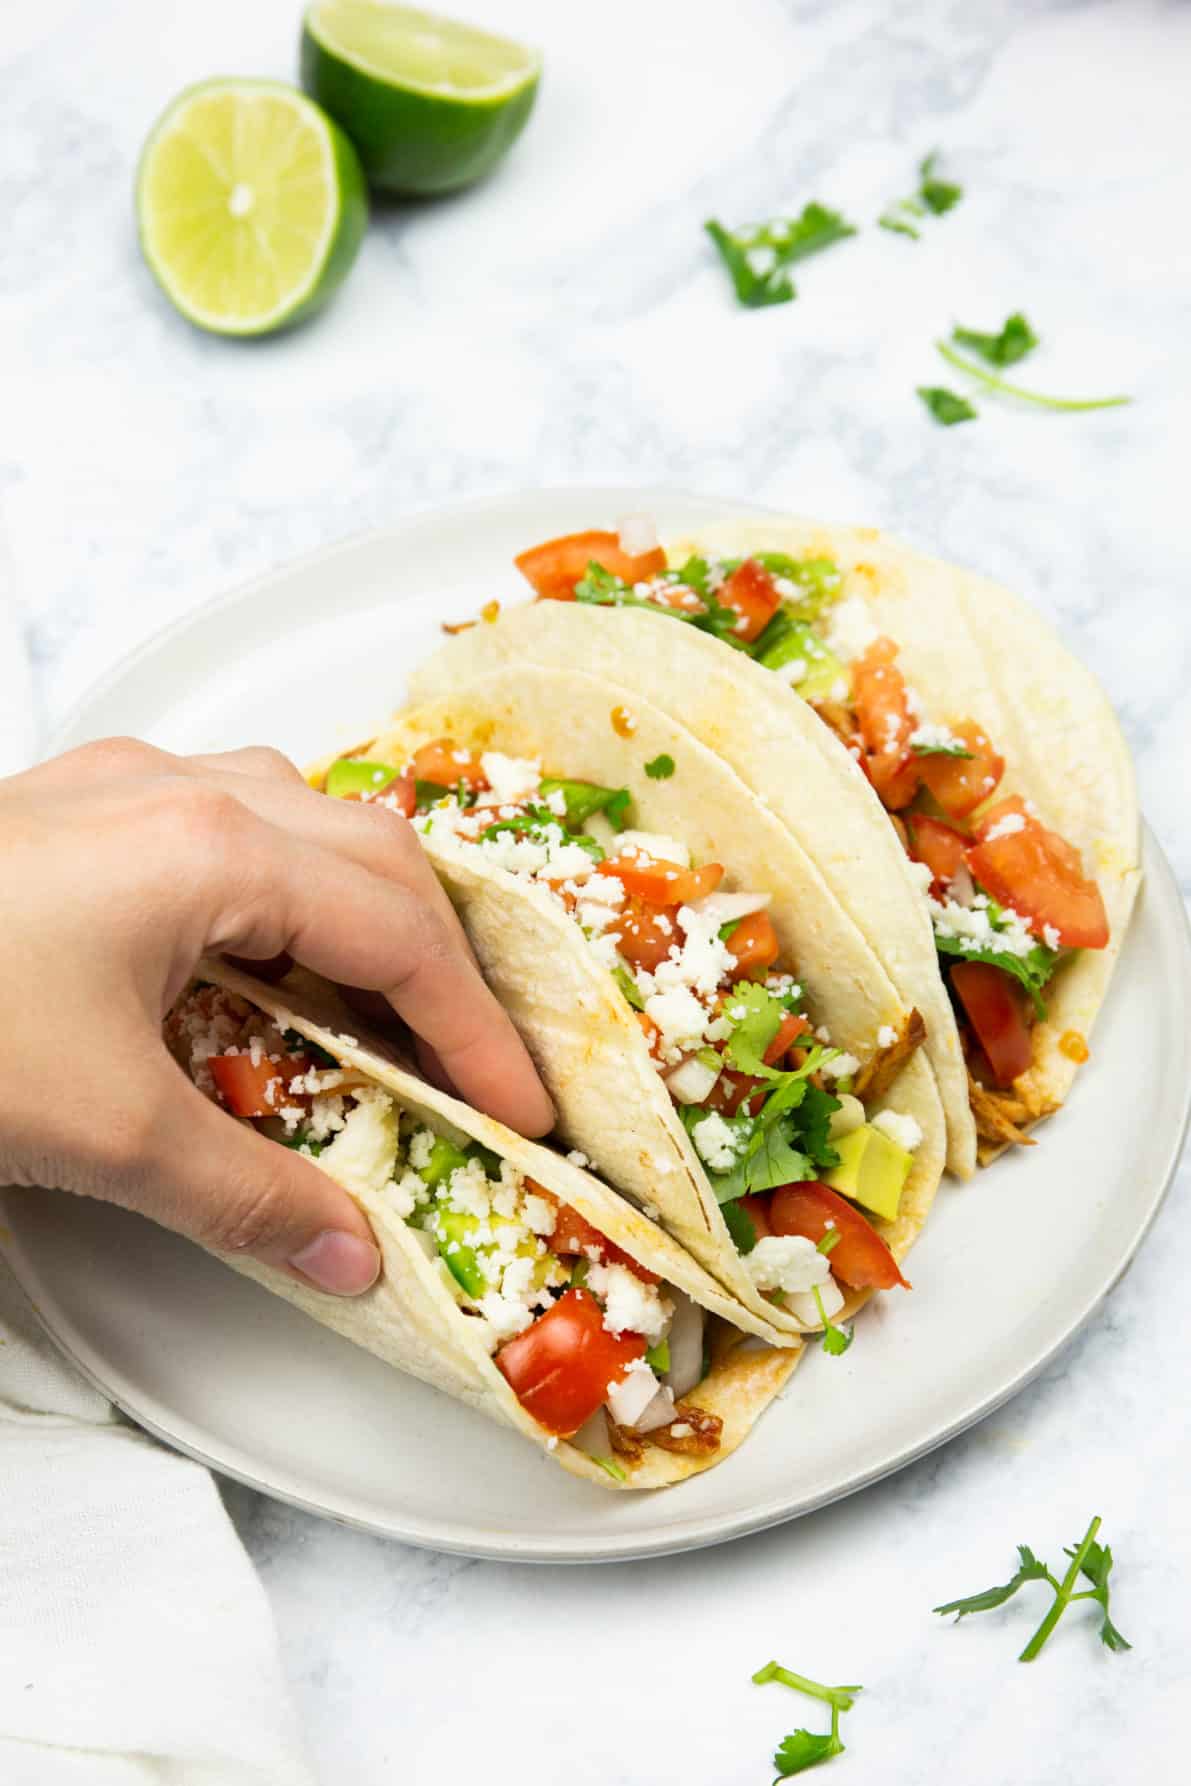 A hand grabbing a sweet pork taco from the plate.